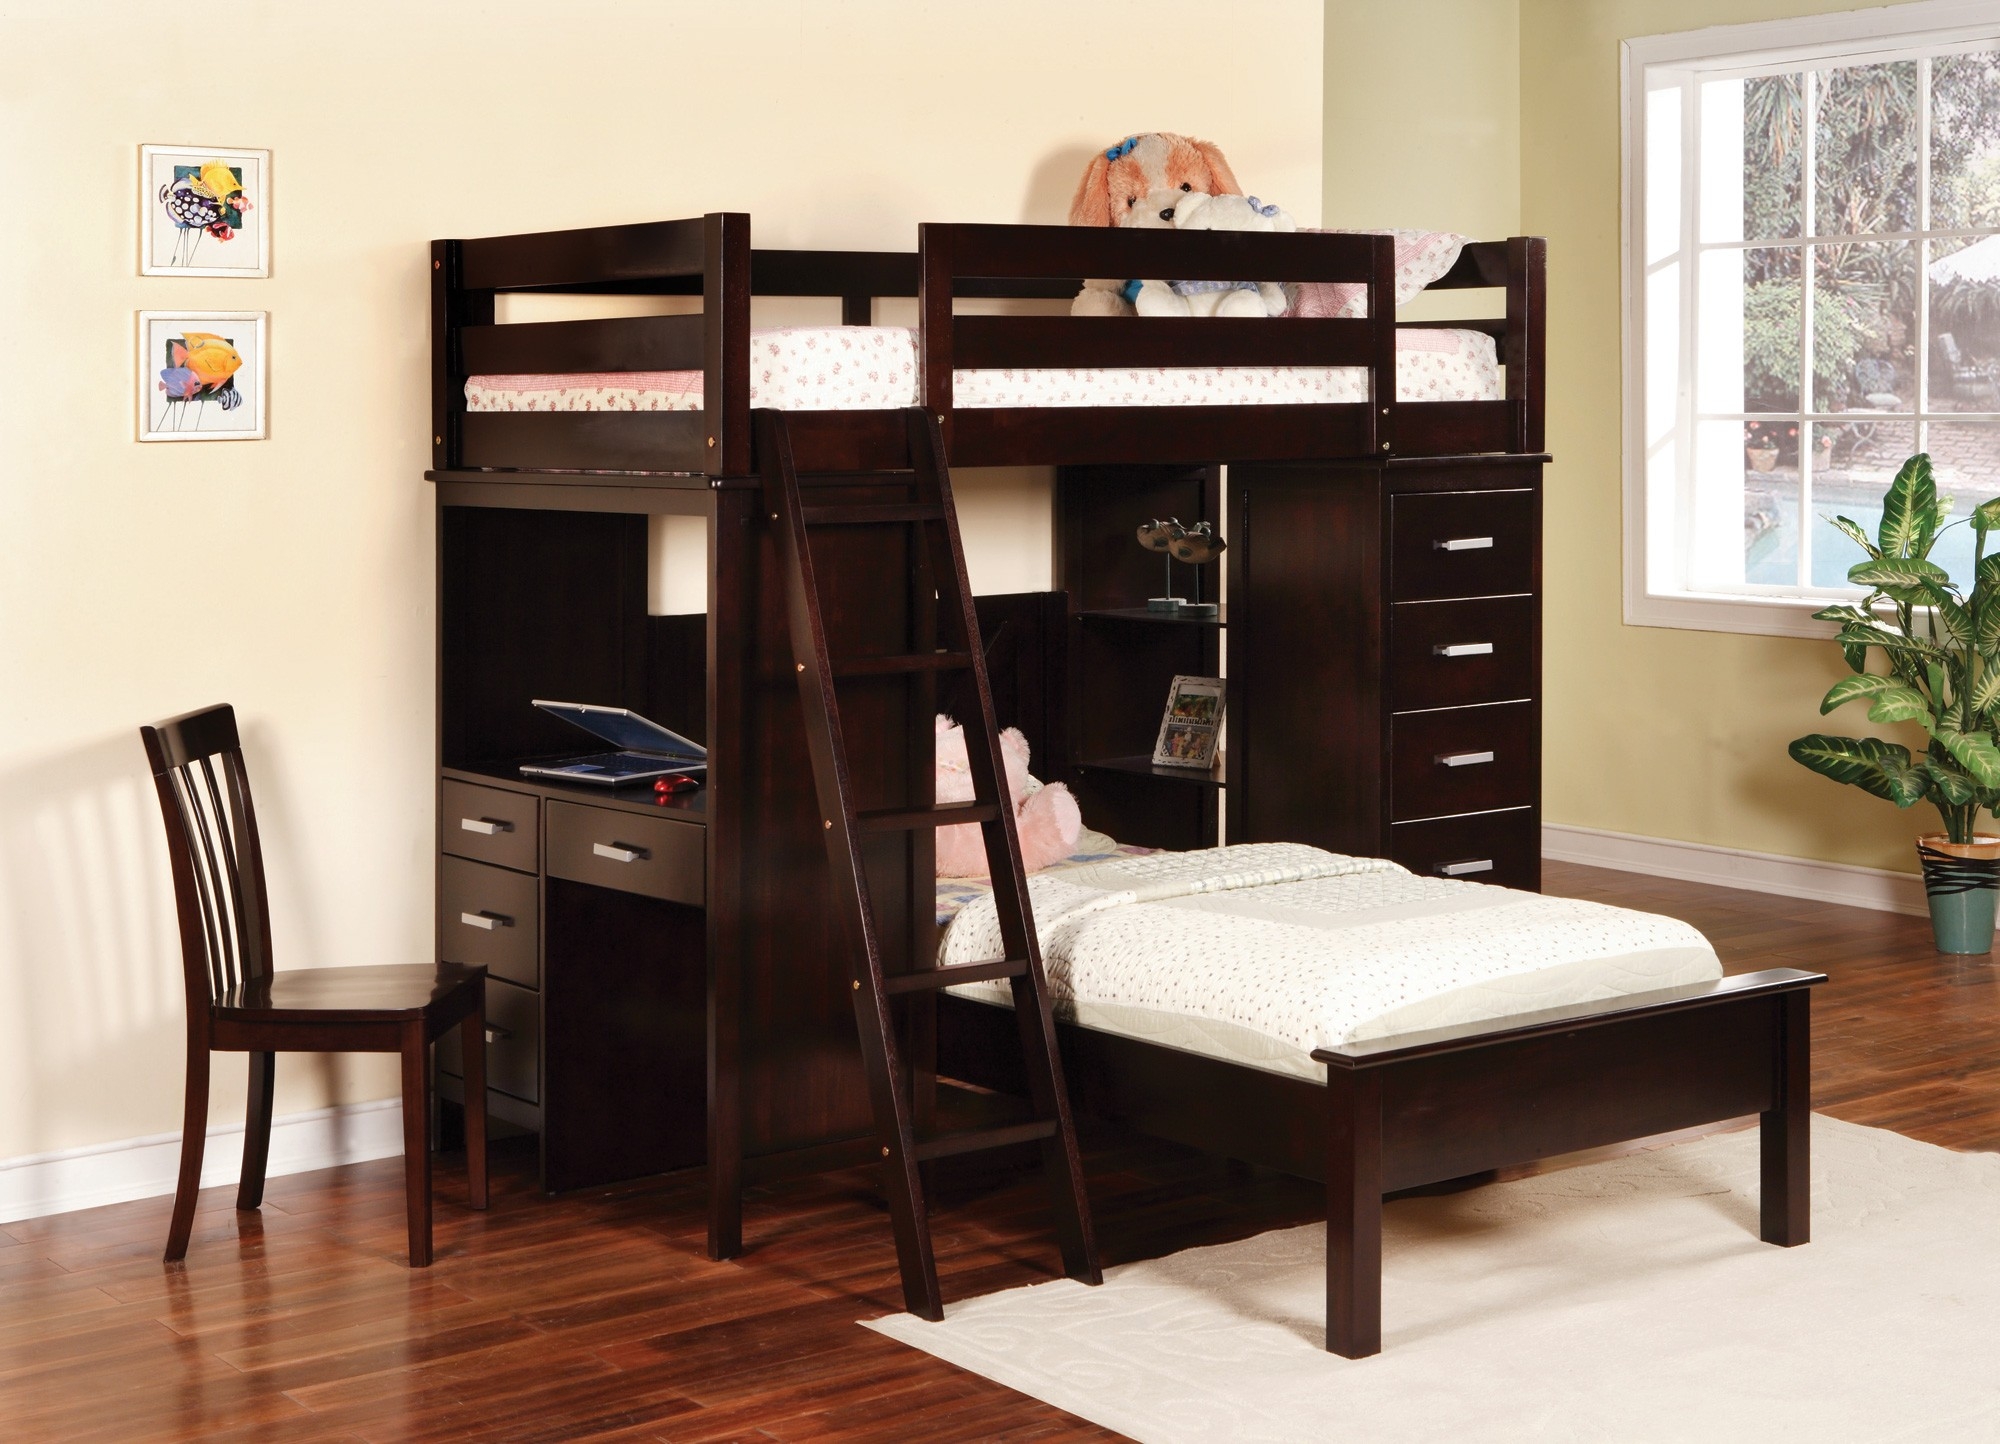 Bunk bed twin twin size workstation bunk bed in cappuccino